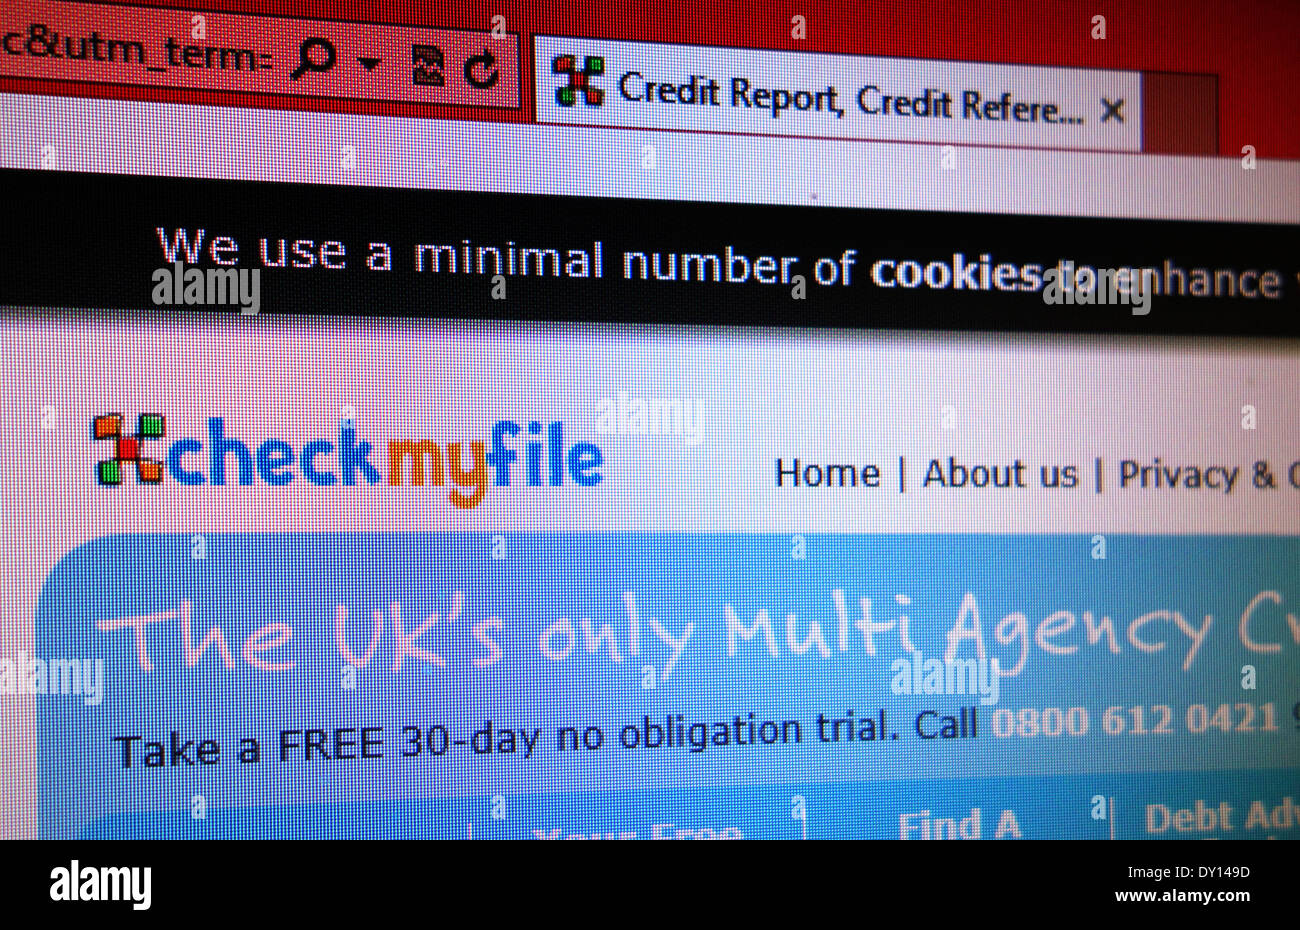 checkmyfile online credit report company Stock Photo